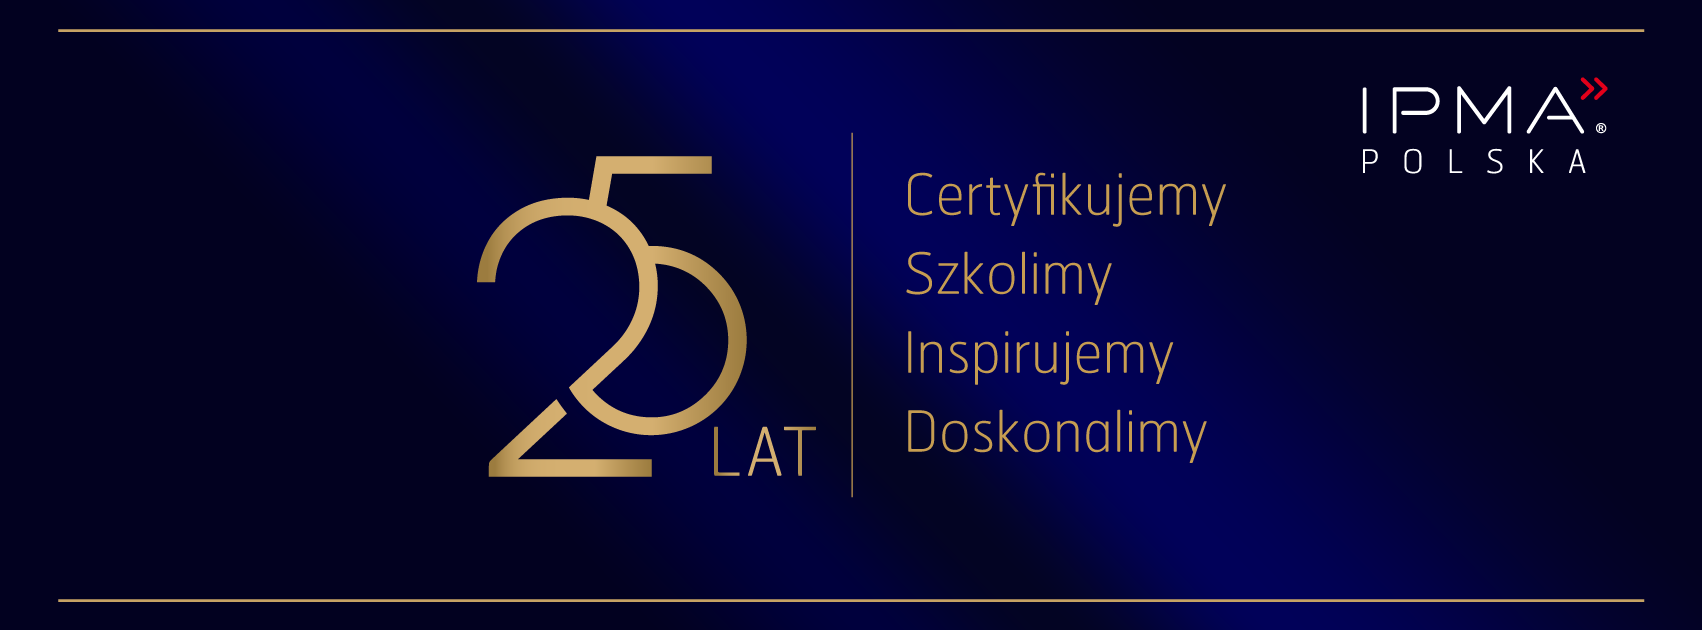 Polish project excellence award